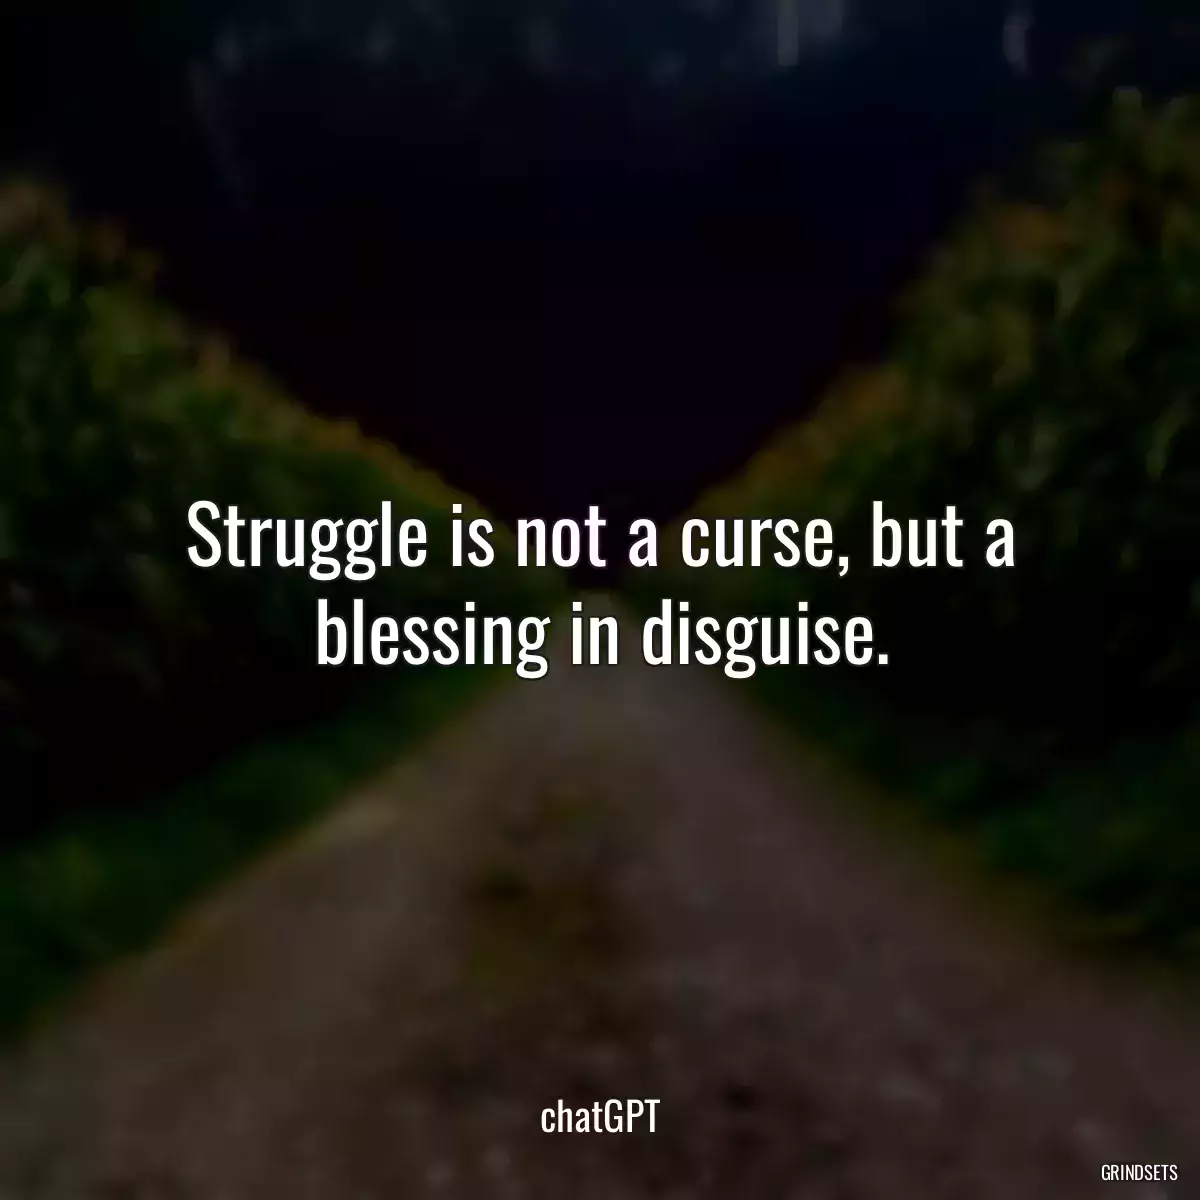 Struggle is not a curse, but a blessing in disguise.